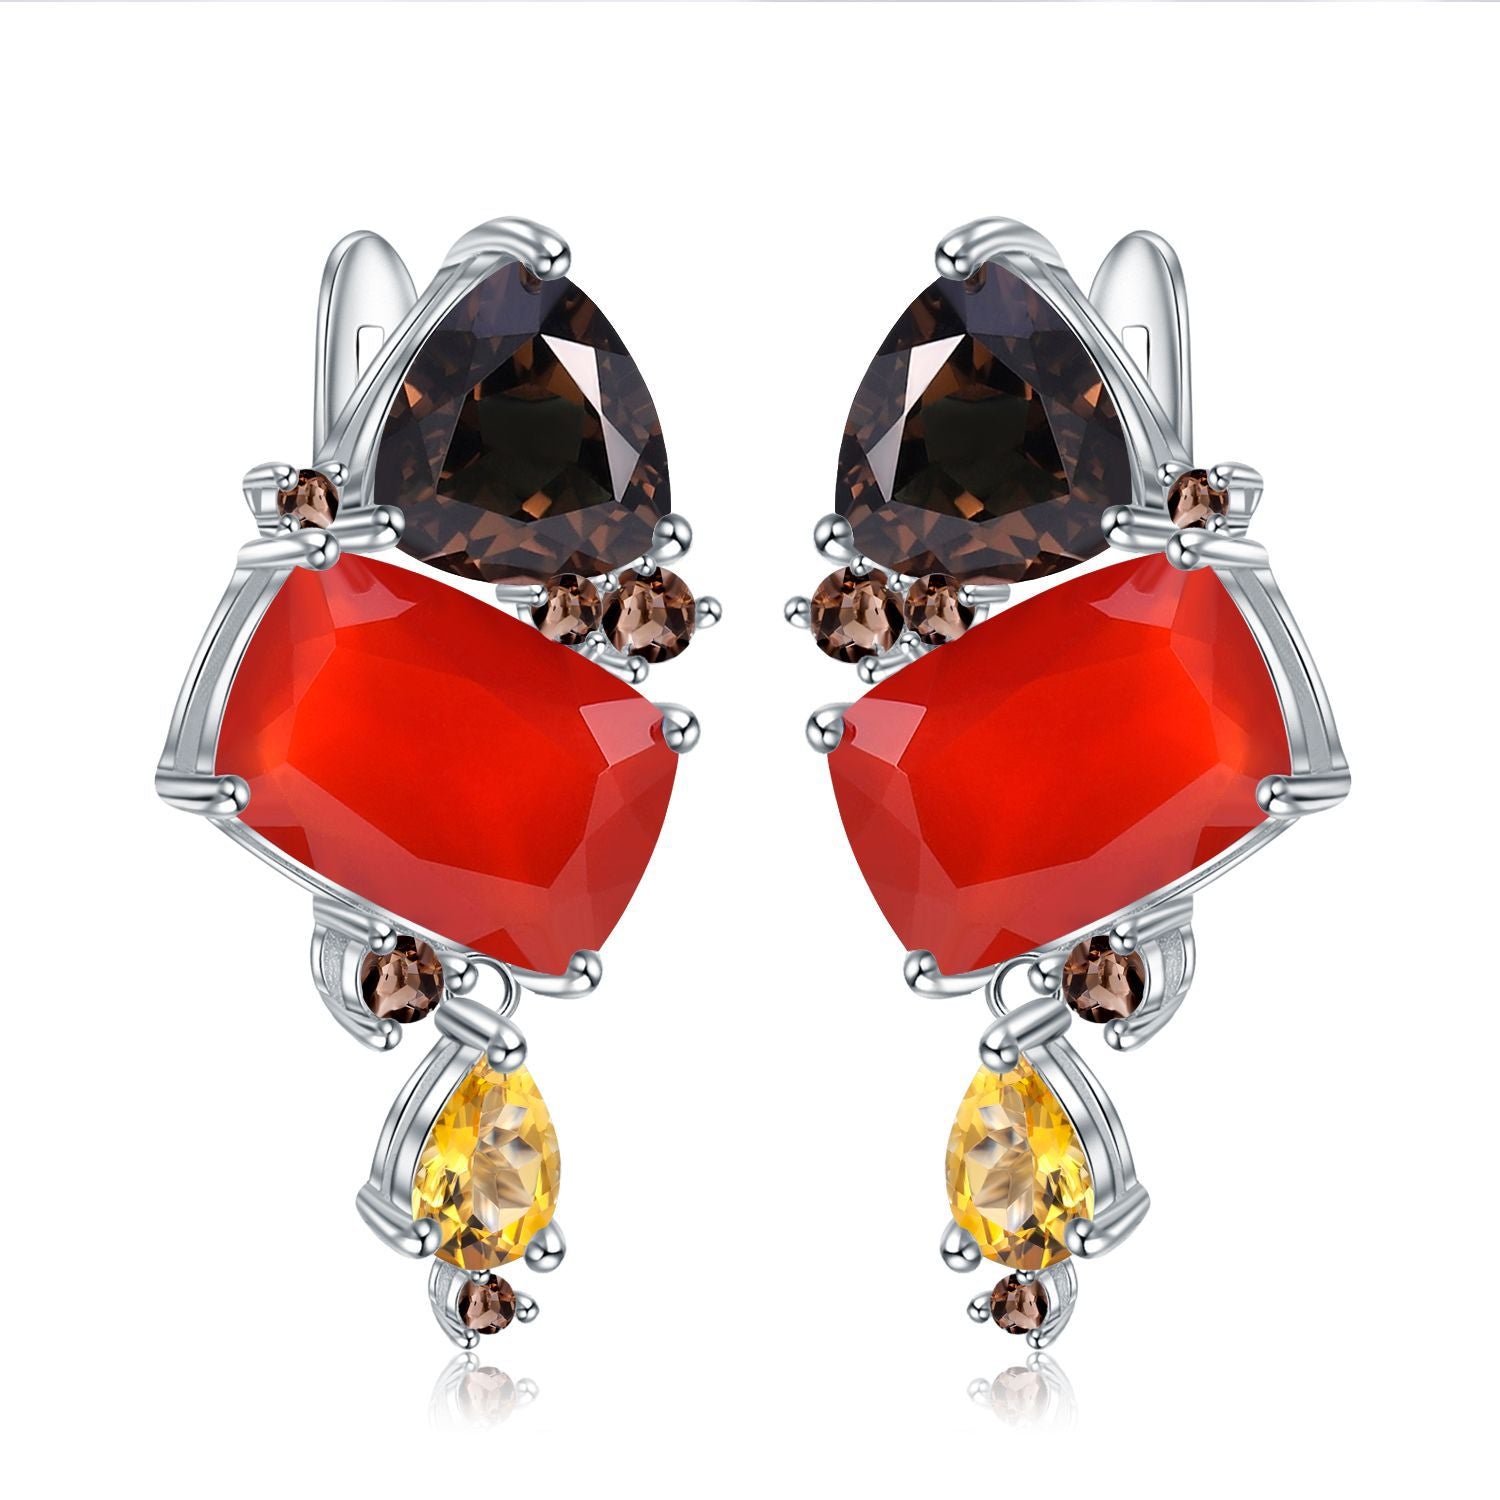 Banquet Inlaid Natural Colourful Gemstone Creative Shape Silver Drop Earrings for Women